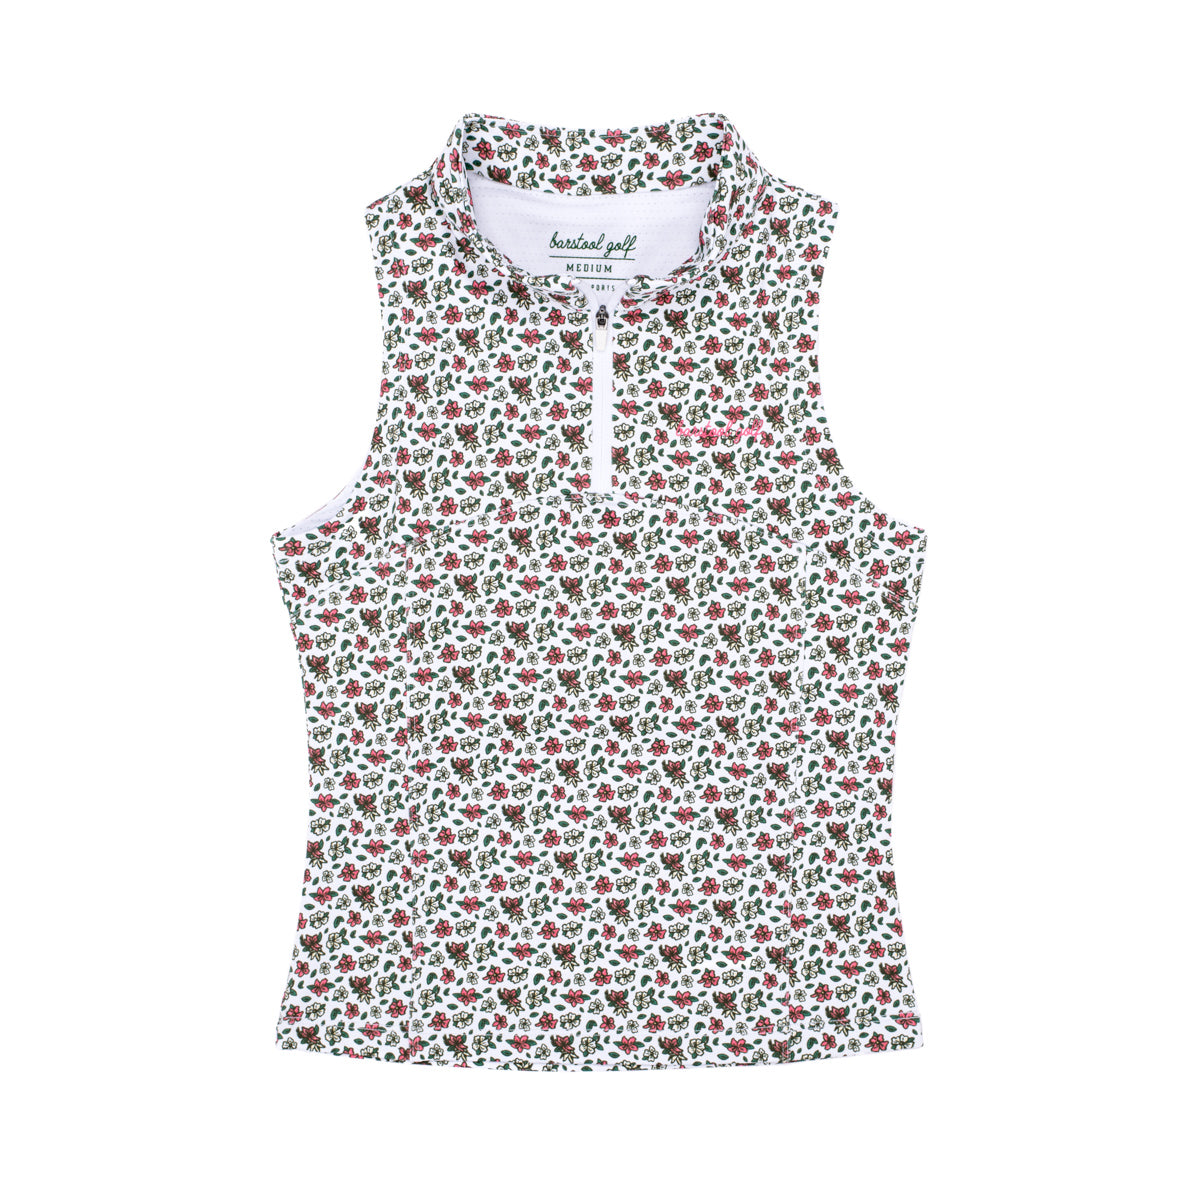 Barstool Golf Women's Floral Sleeveless Top-T-Shirts-Fore Play-White-XS-Barstool Sports